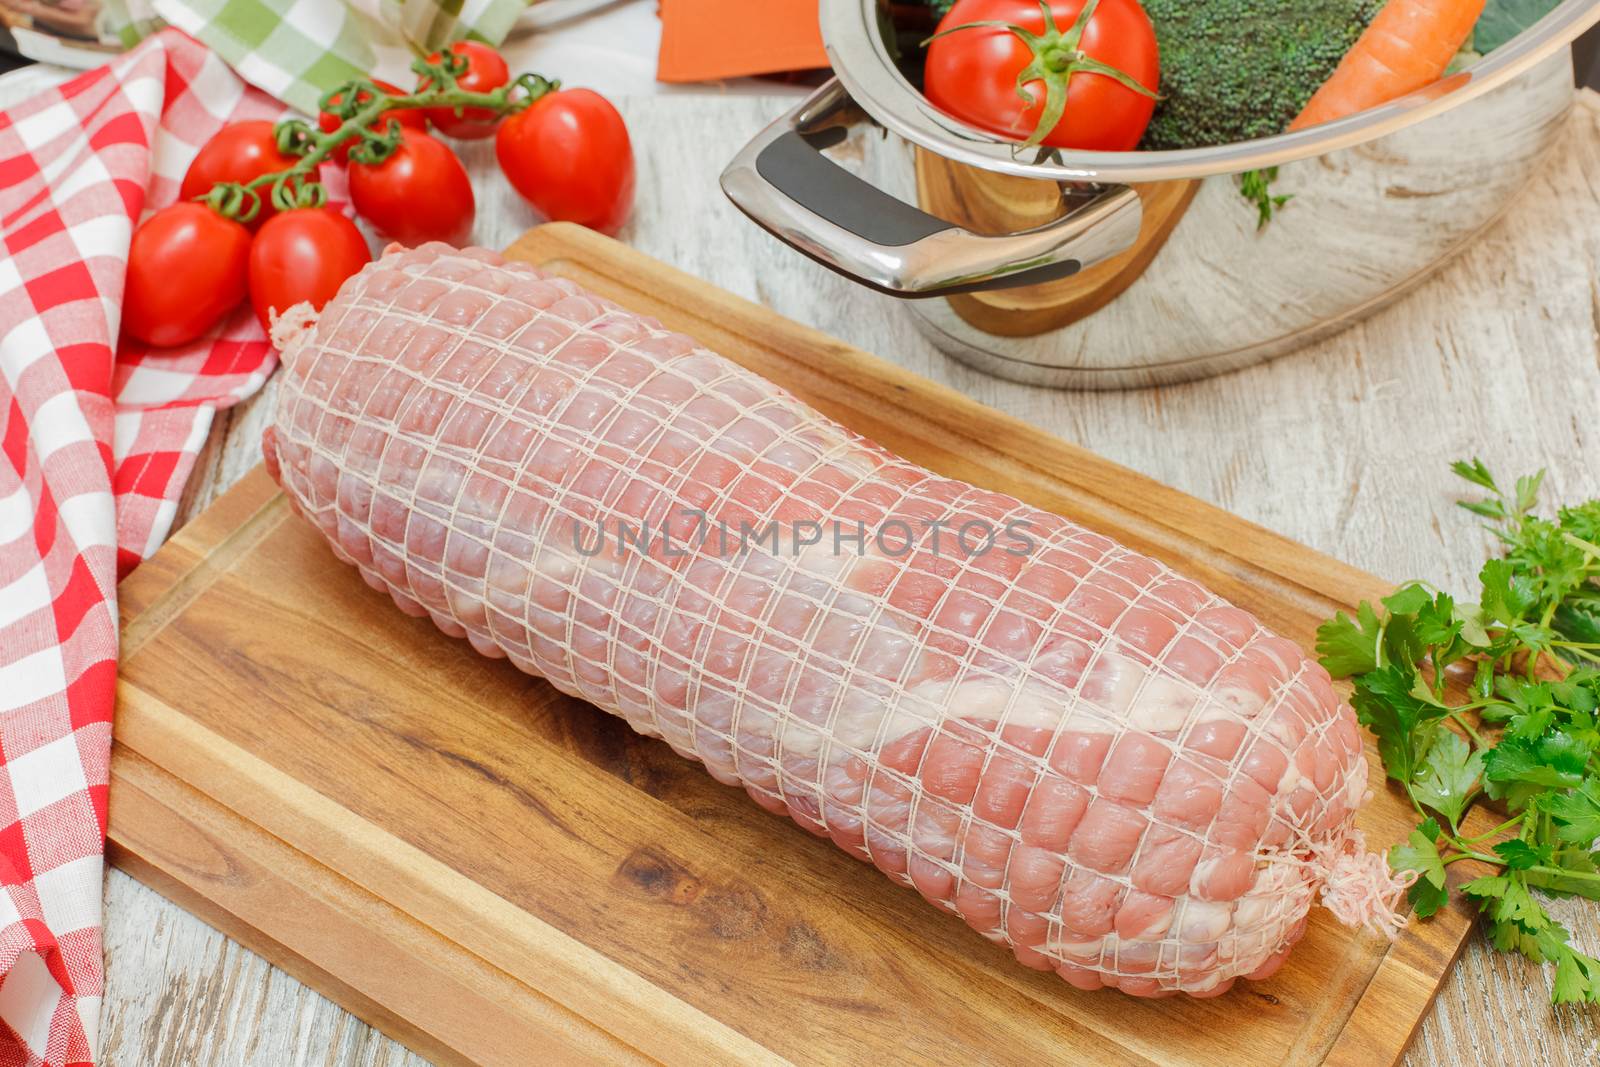 Stuffed Veal Roulade on wooden cutting board. Uncooked meat. Raw fresh veal roulade ready to cooking